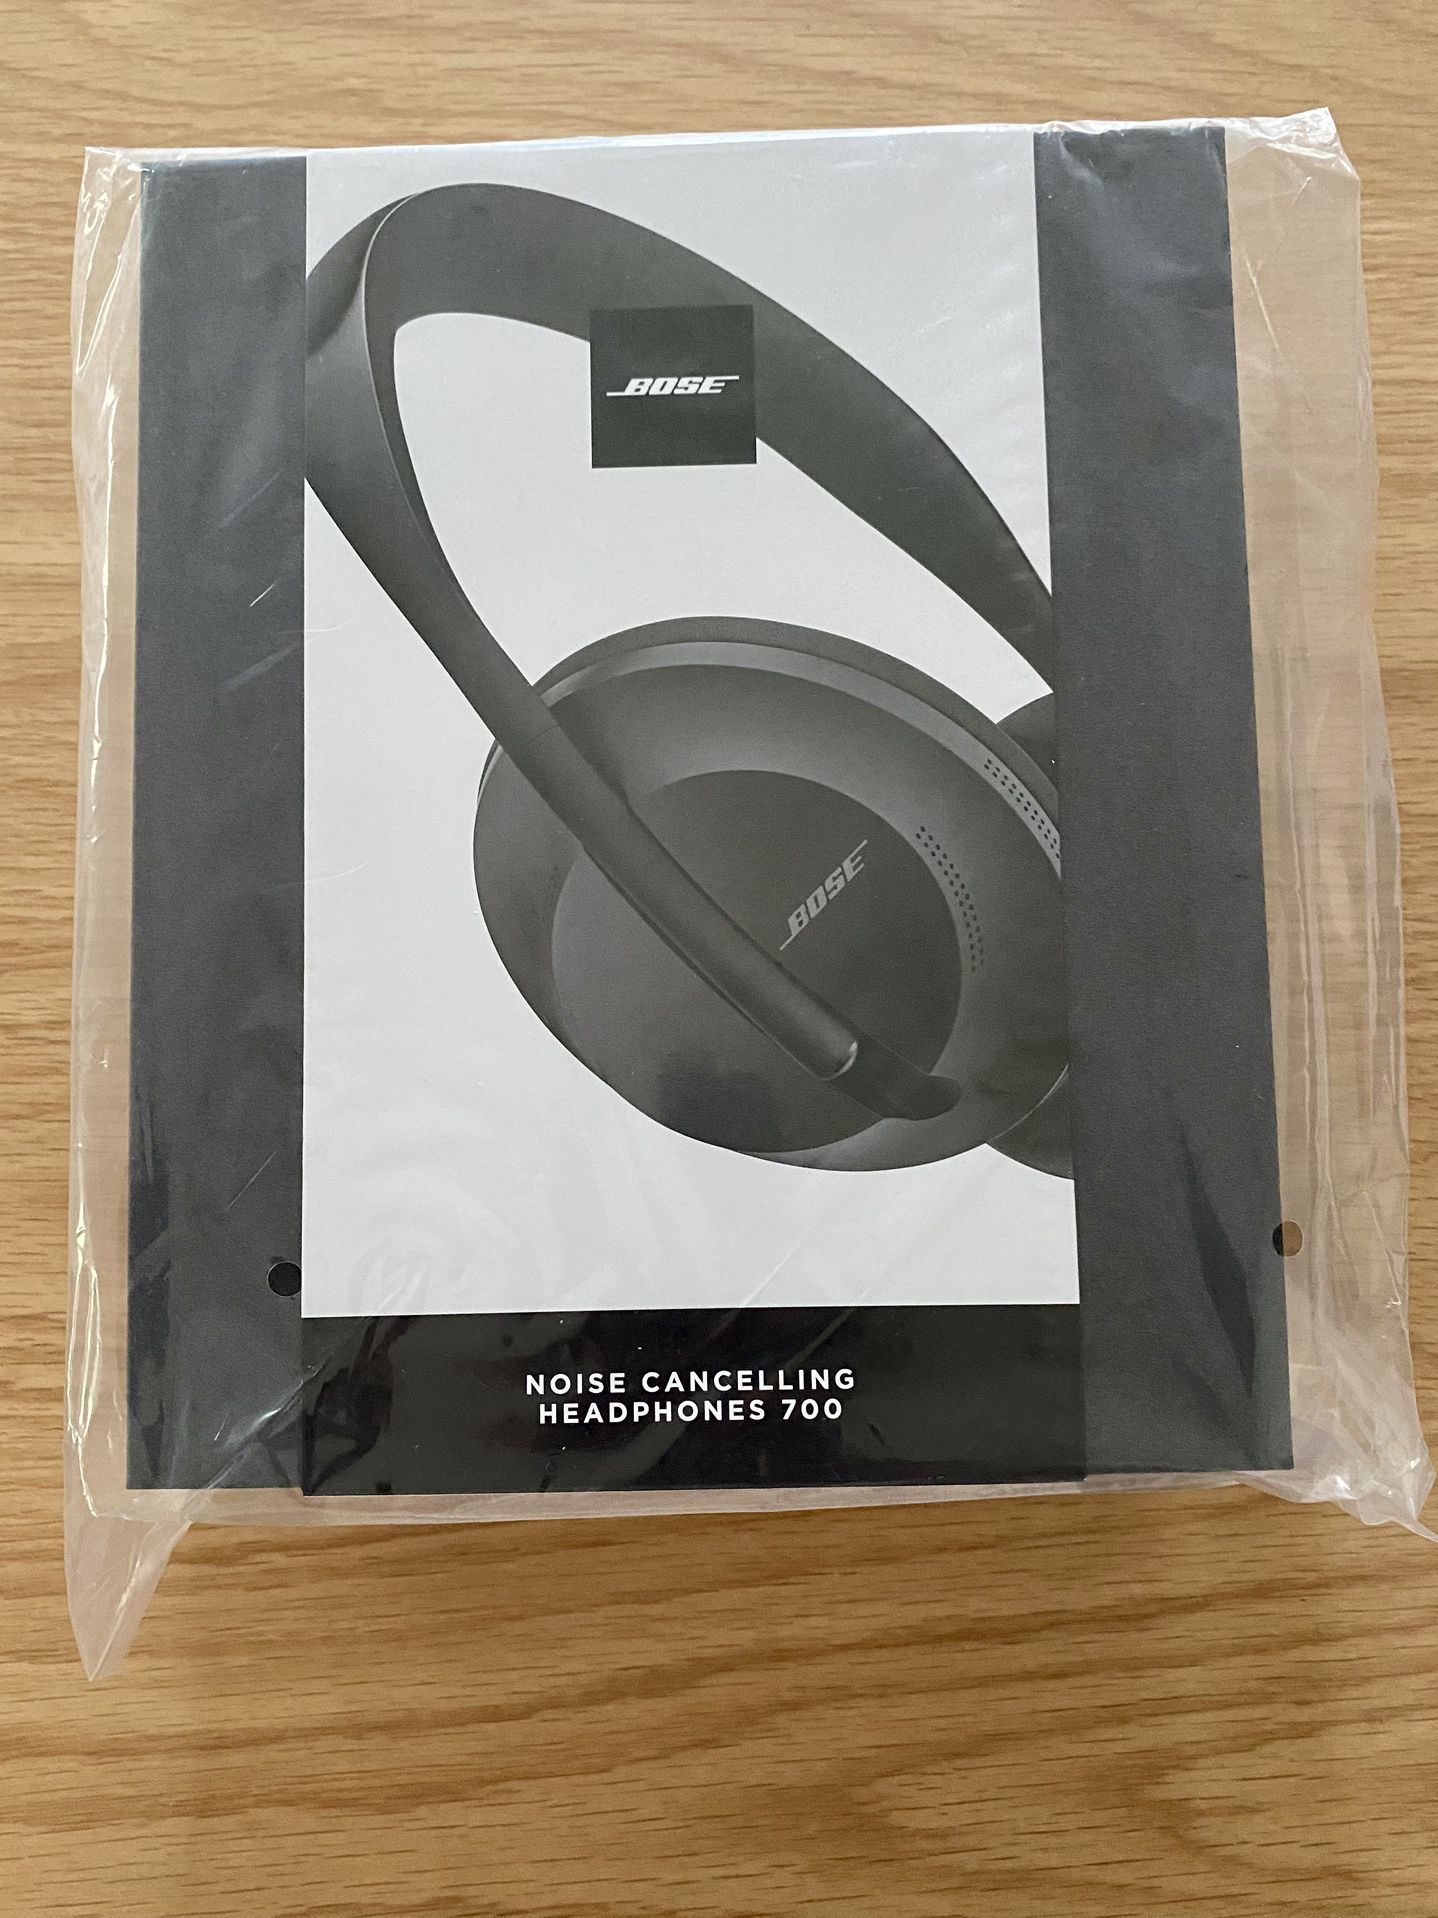 Bose 700 NEW IN BOX Noise Cancelling Headphones - Black Bluetooth